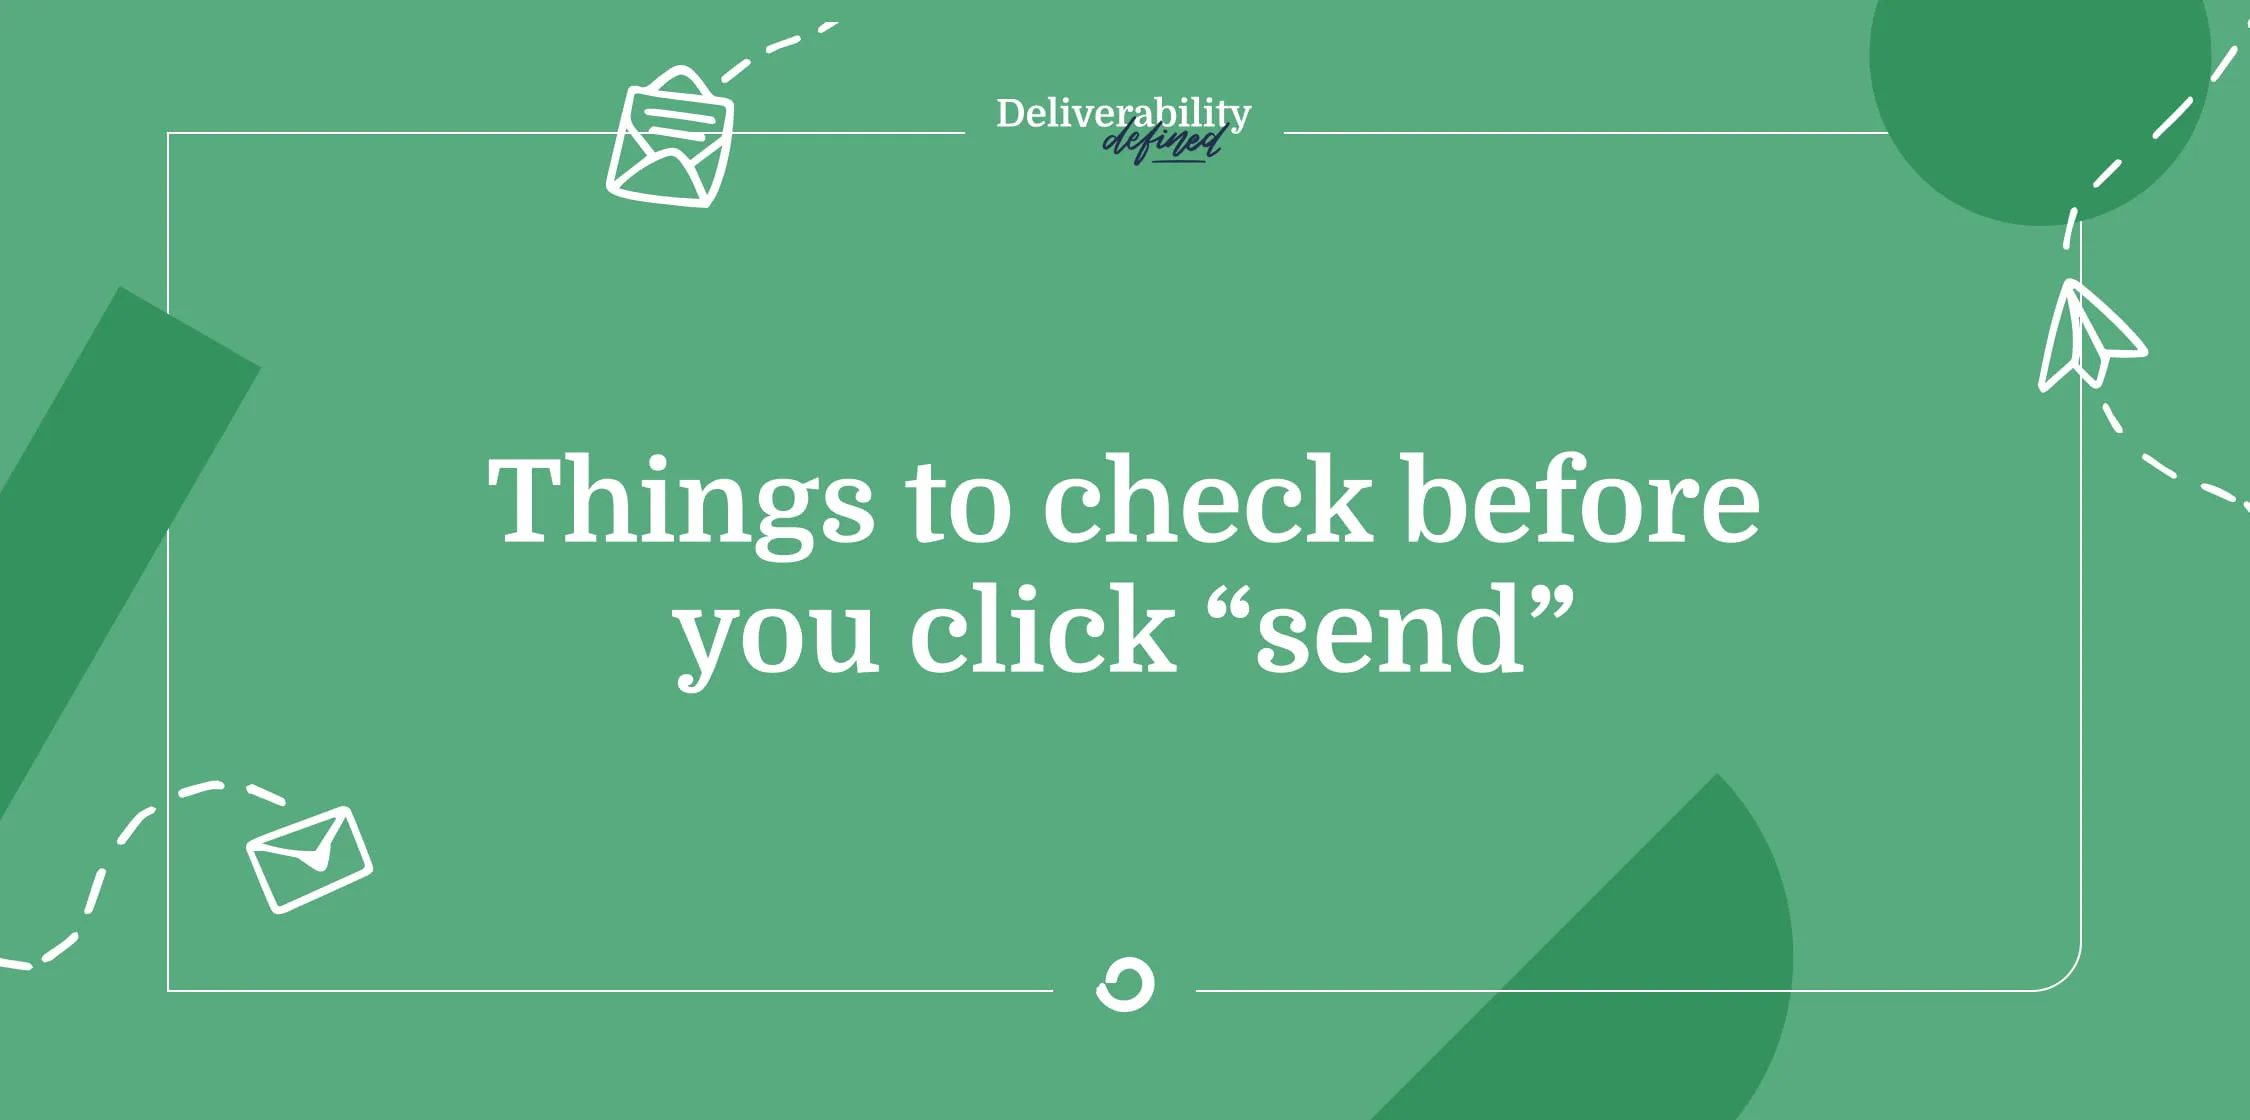 Things to check before you click “send”